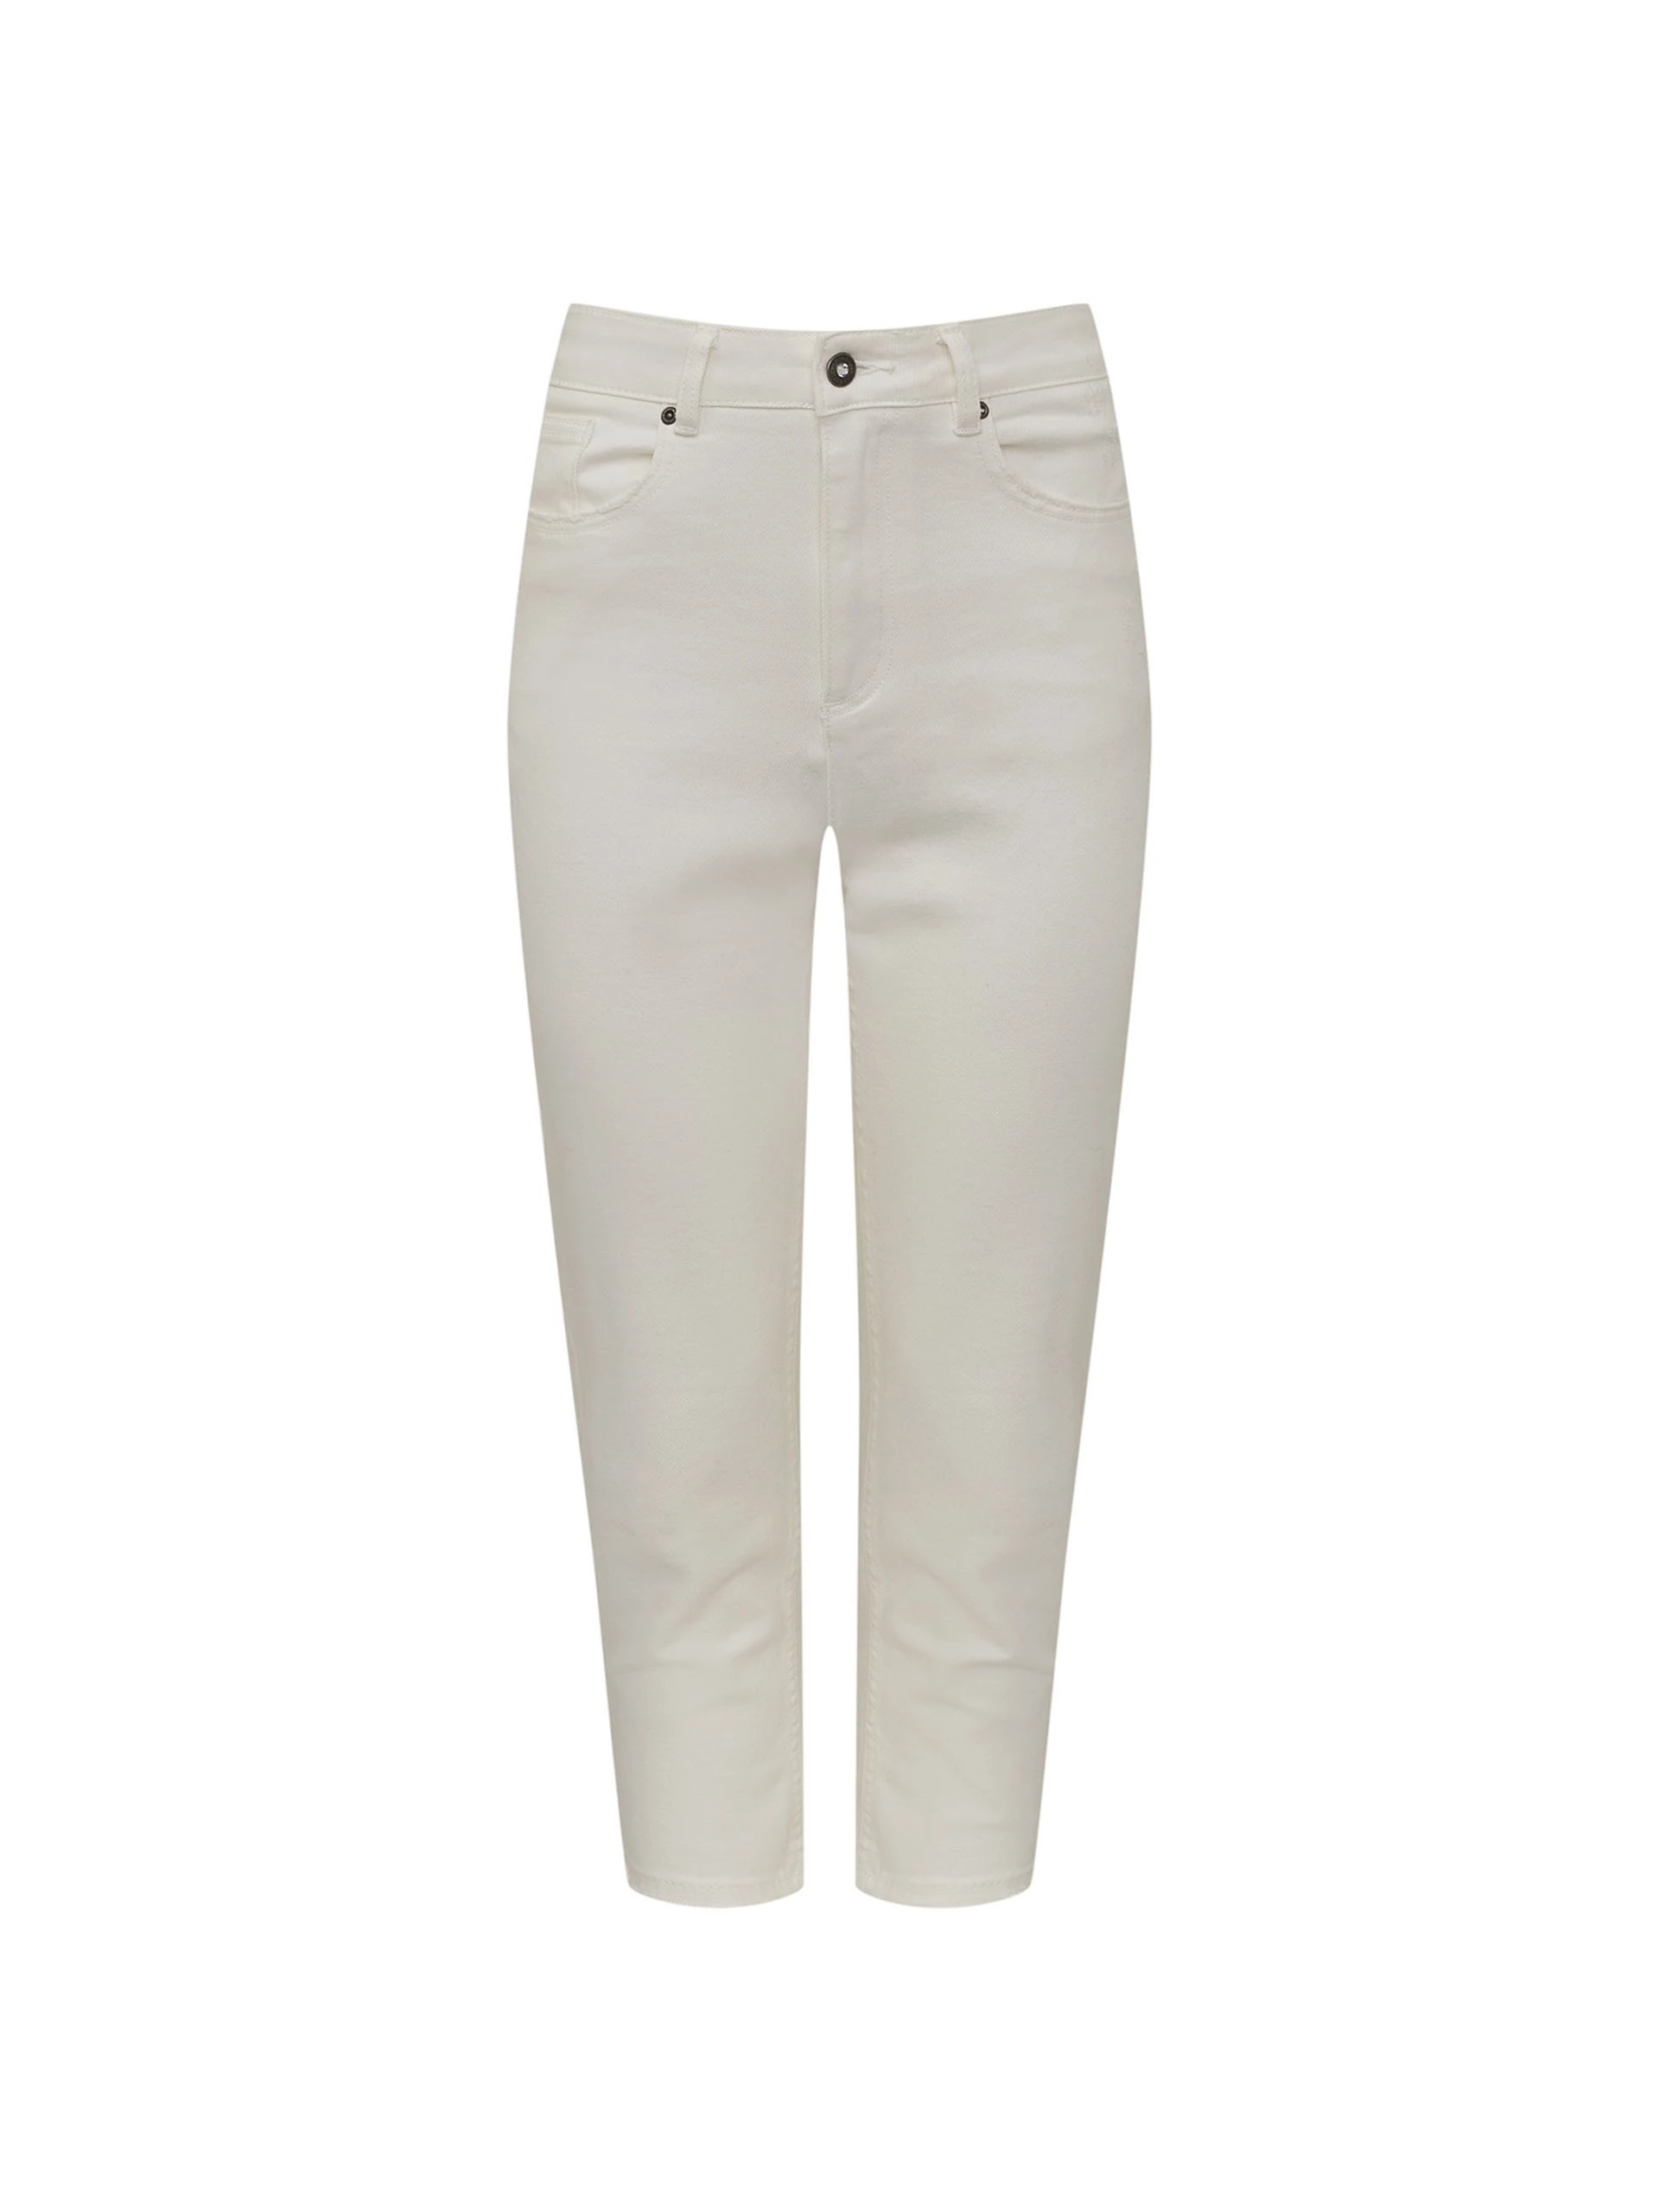 WHITE HIGH-WAISTED JEANS